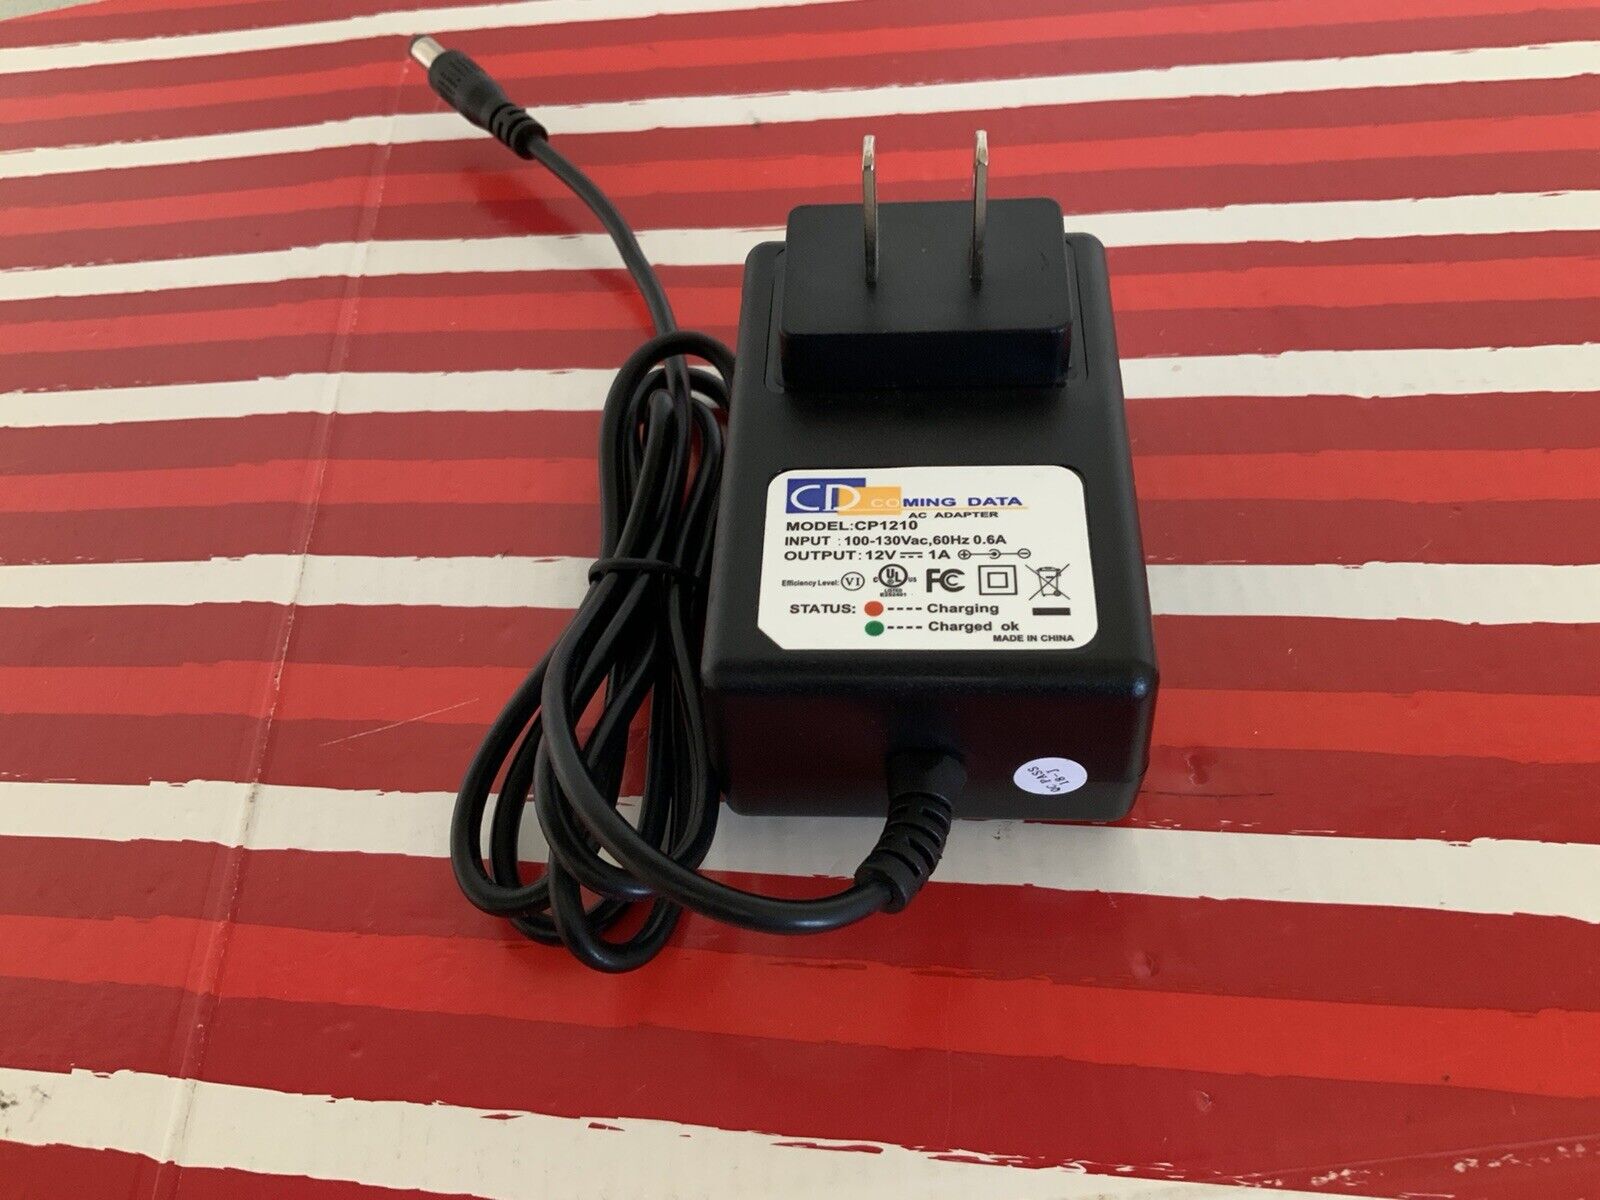 *Brand NEW*CD-Coming Data Model-CP1210 Output-12V-1A Ac Adapter